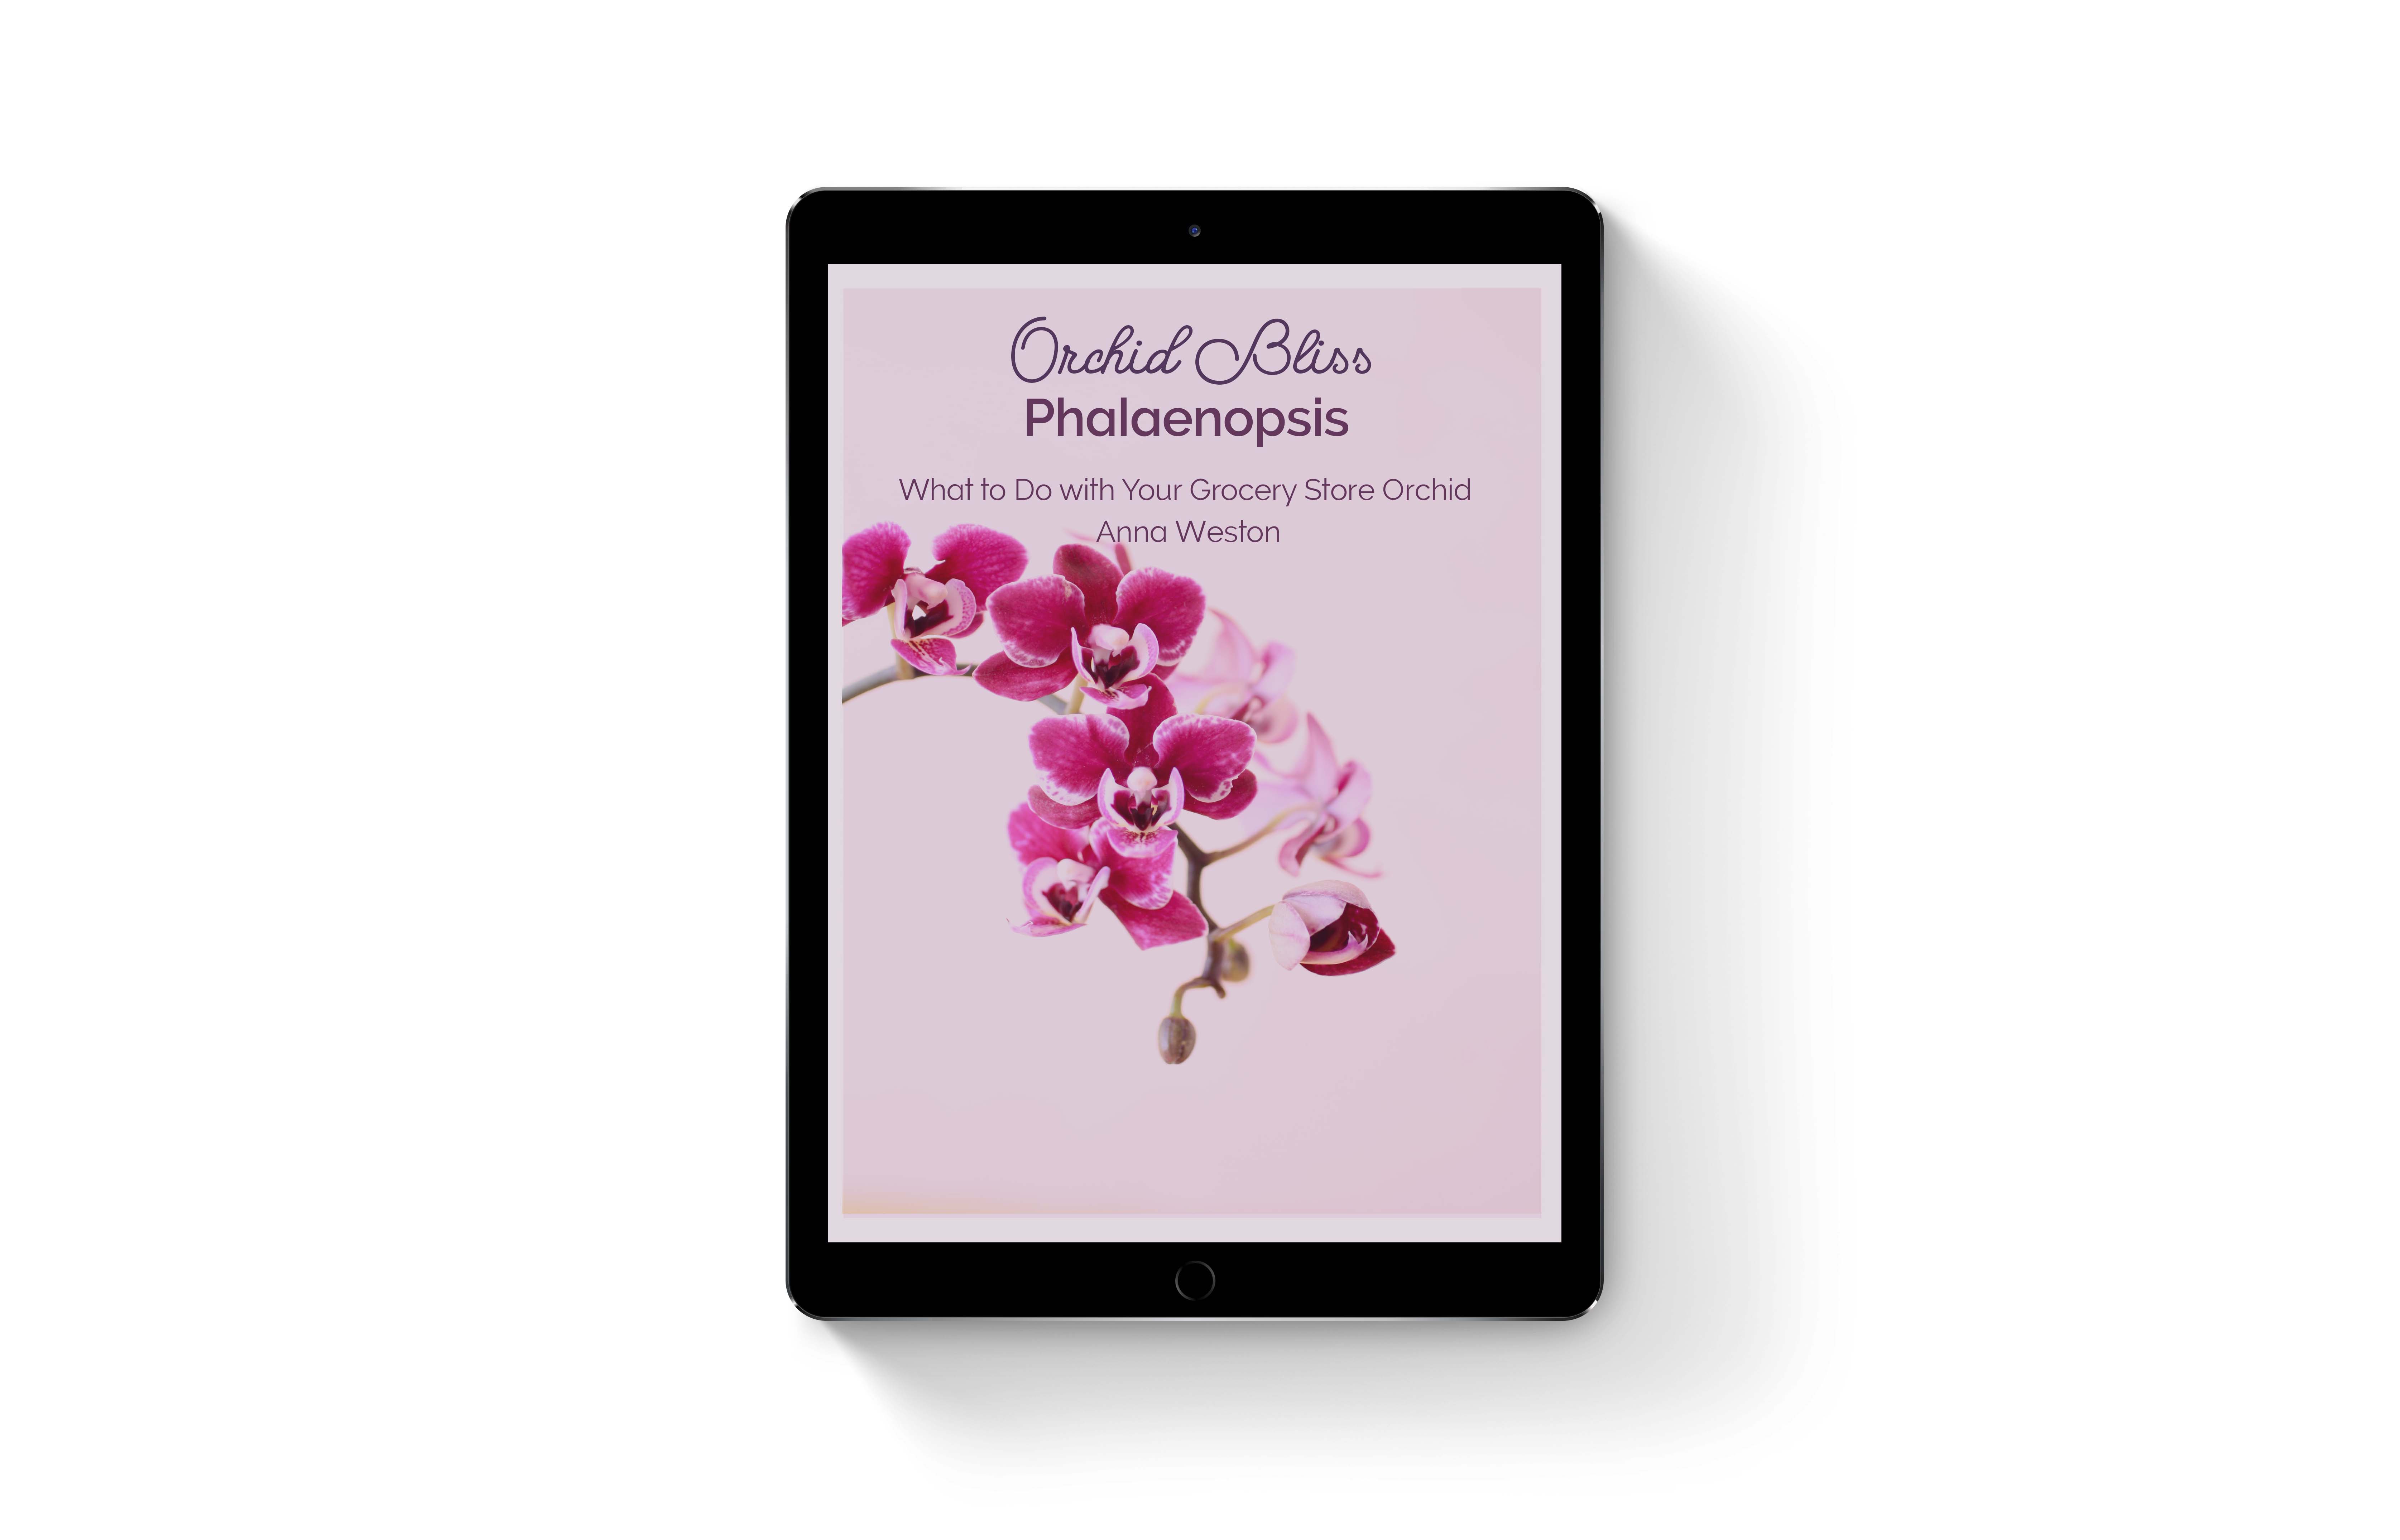 What to Do with Your Grocery Store Orchid Ebook